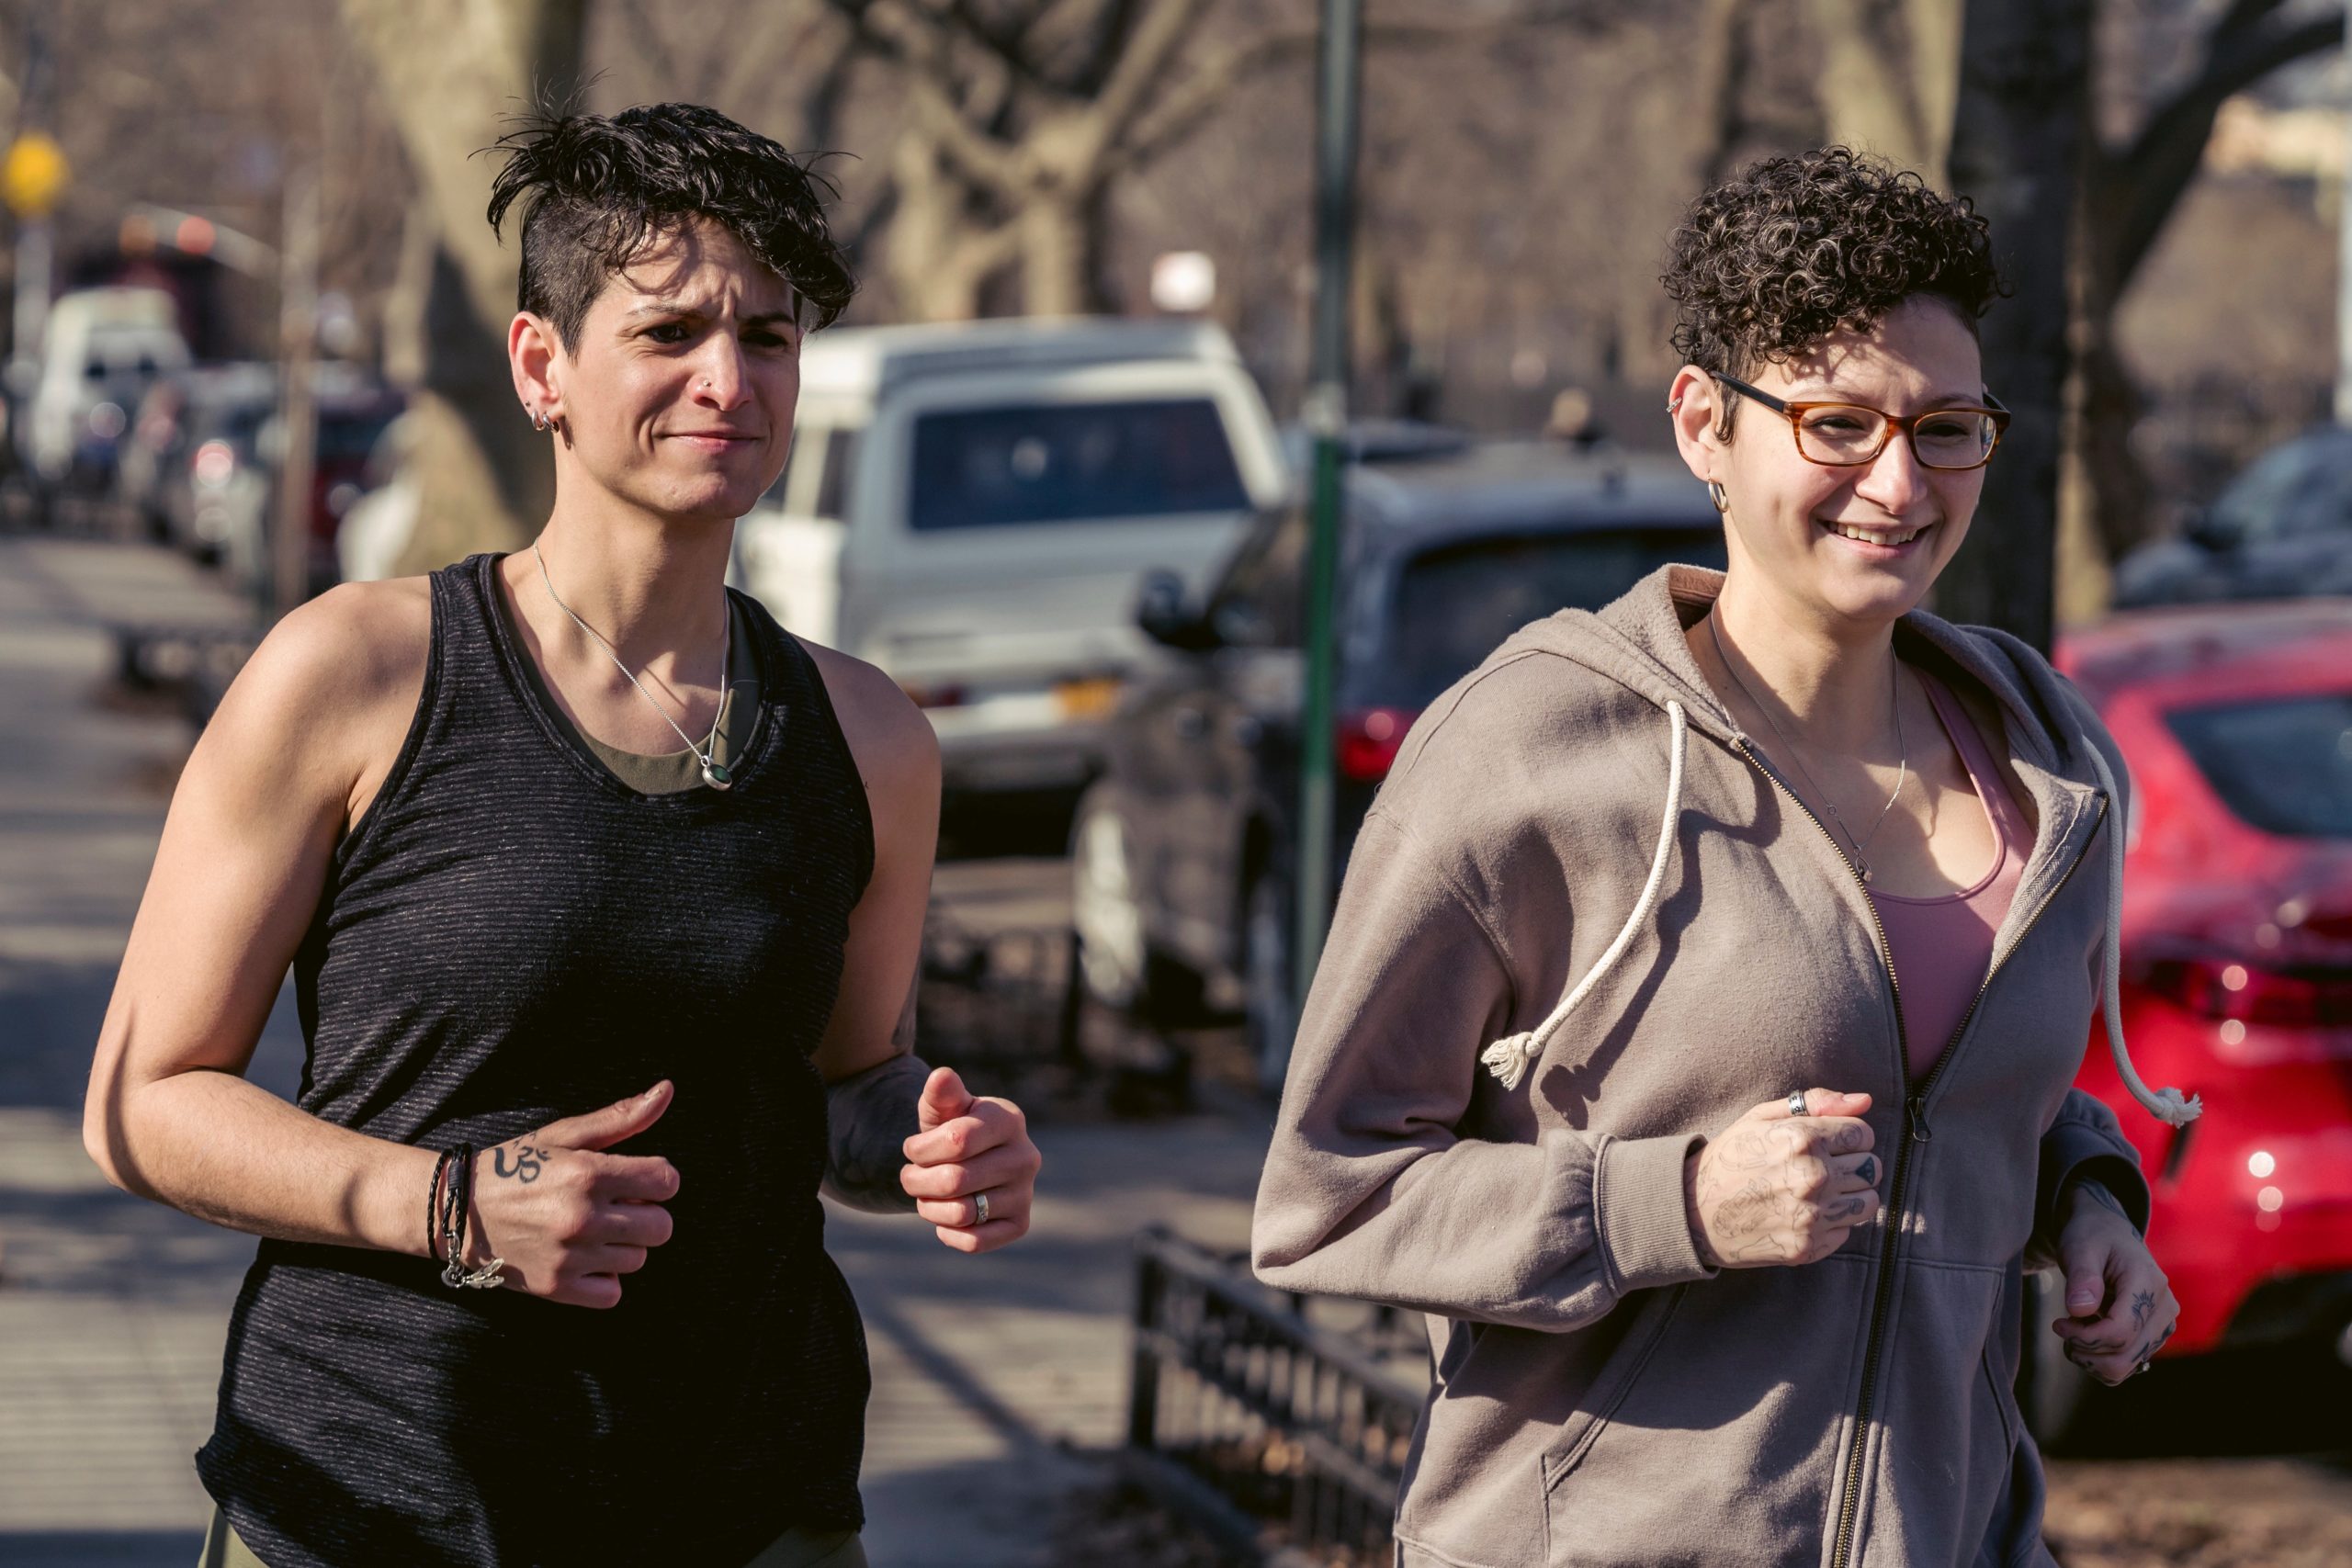 Two androgynous-looking women are jogging down a street.